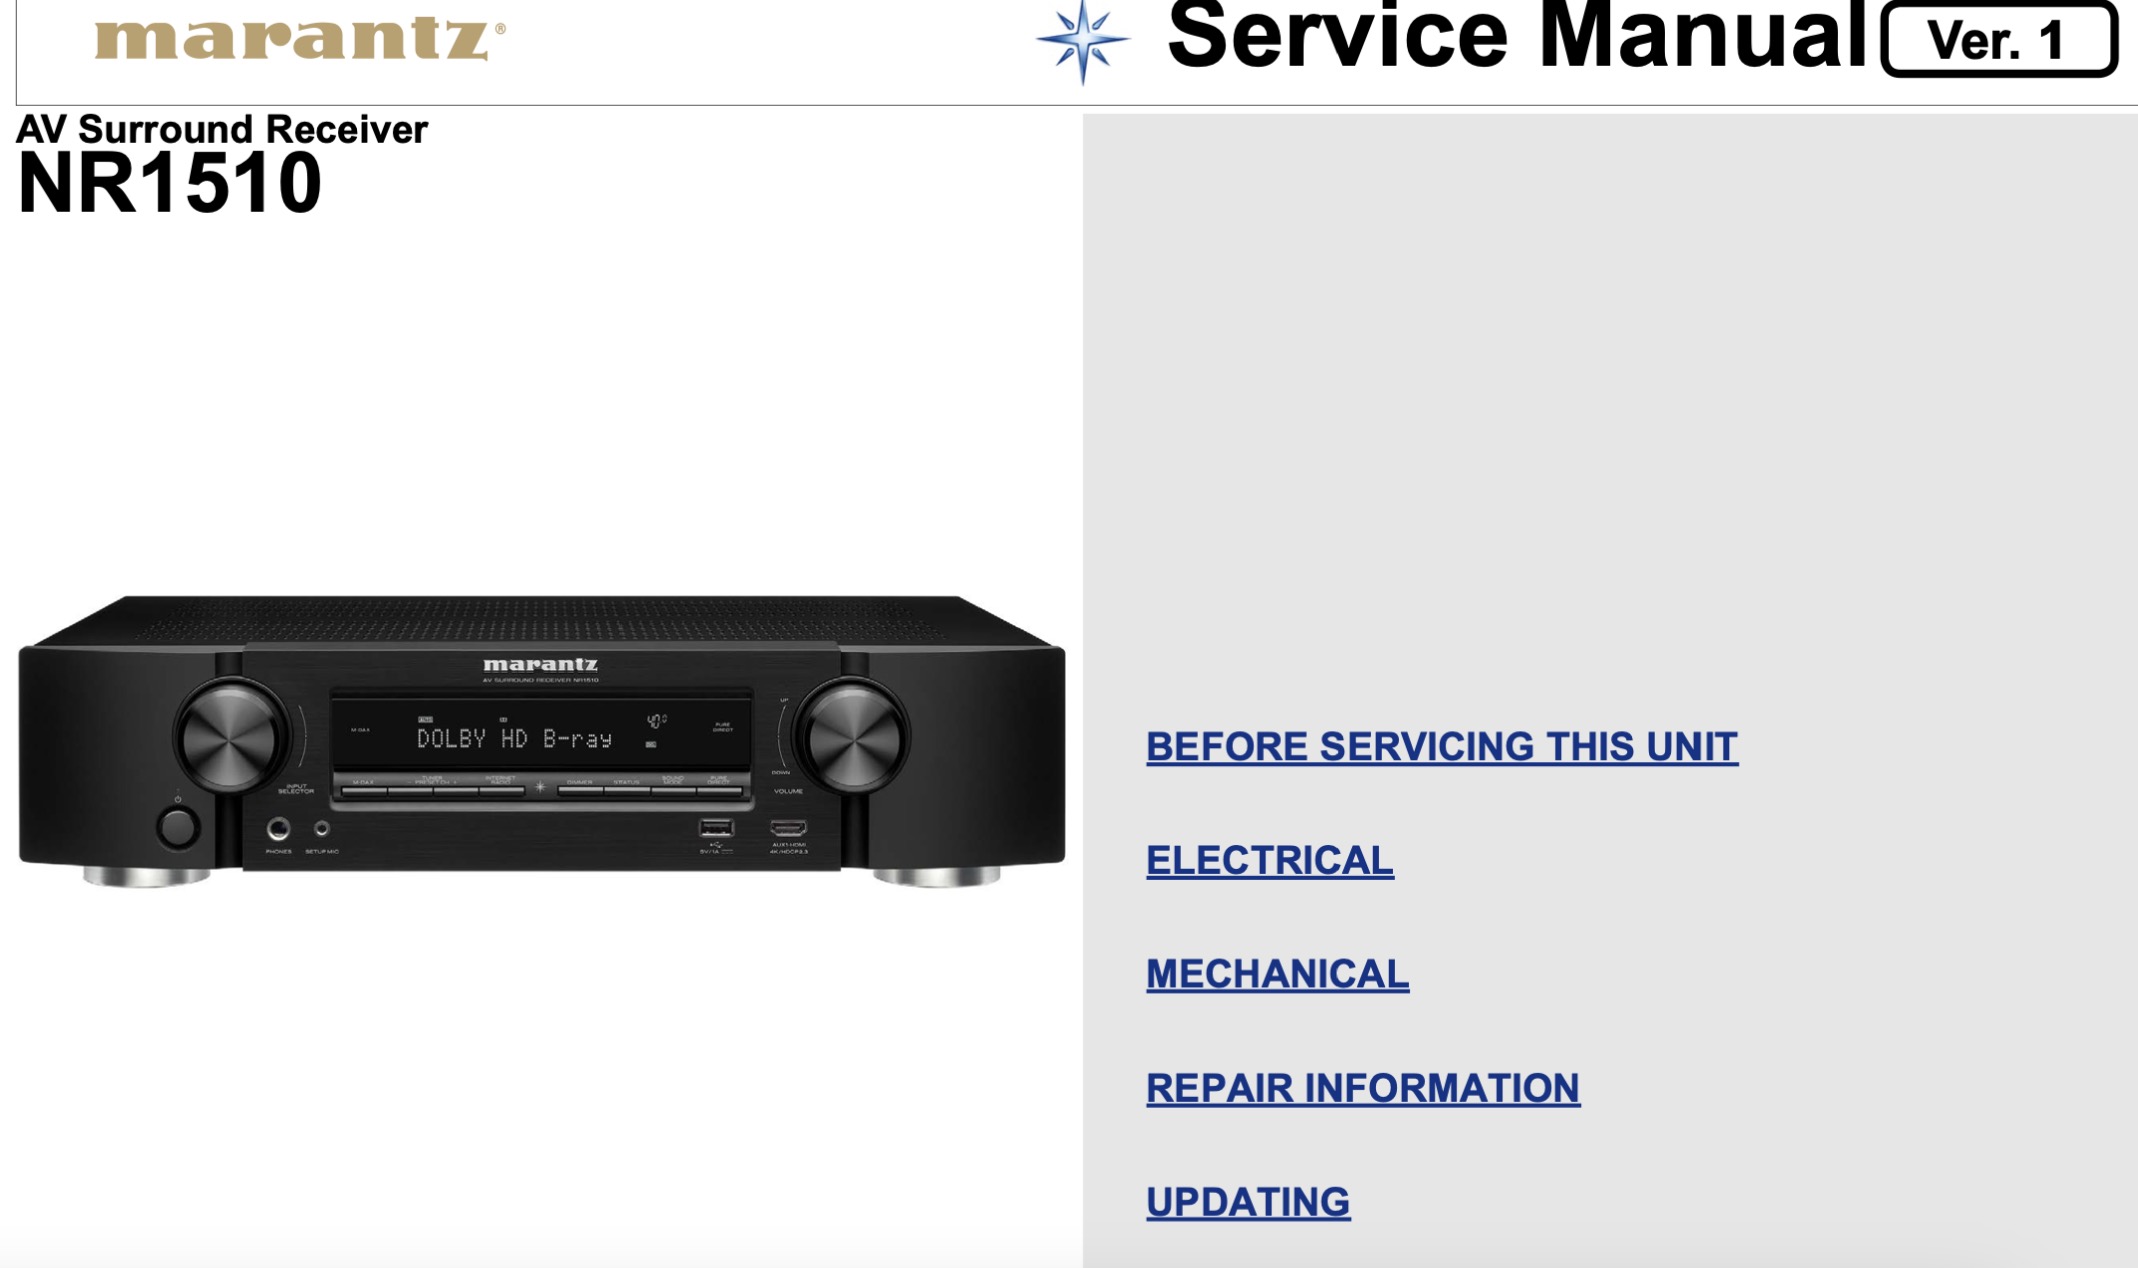 Marantz NR1510 AV Surround Receiver Service Manual, Parts List, Exploded View, Wiring and Schematic Diagram